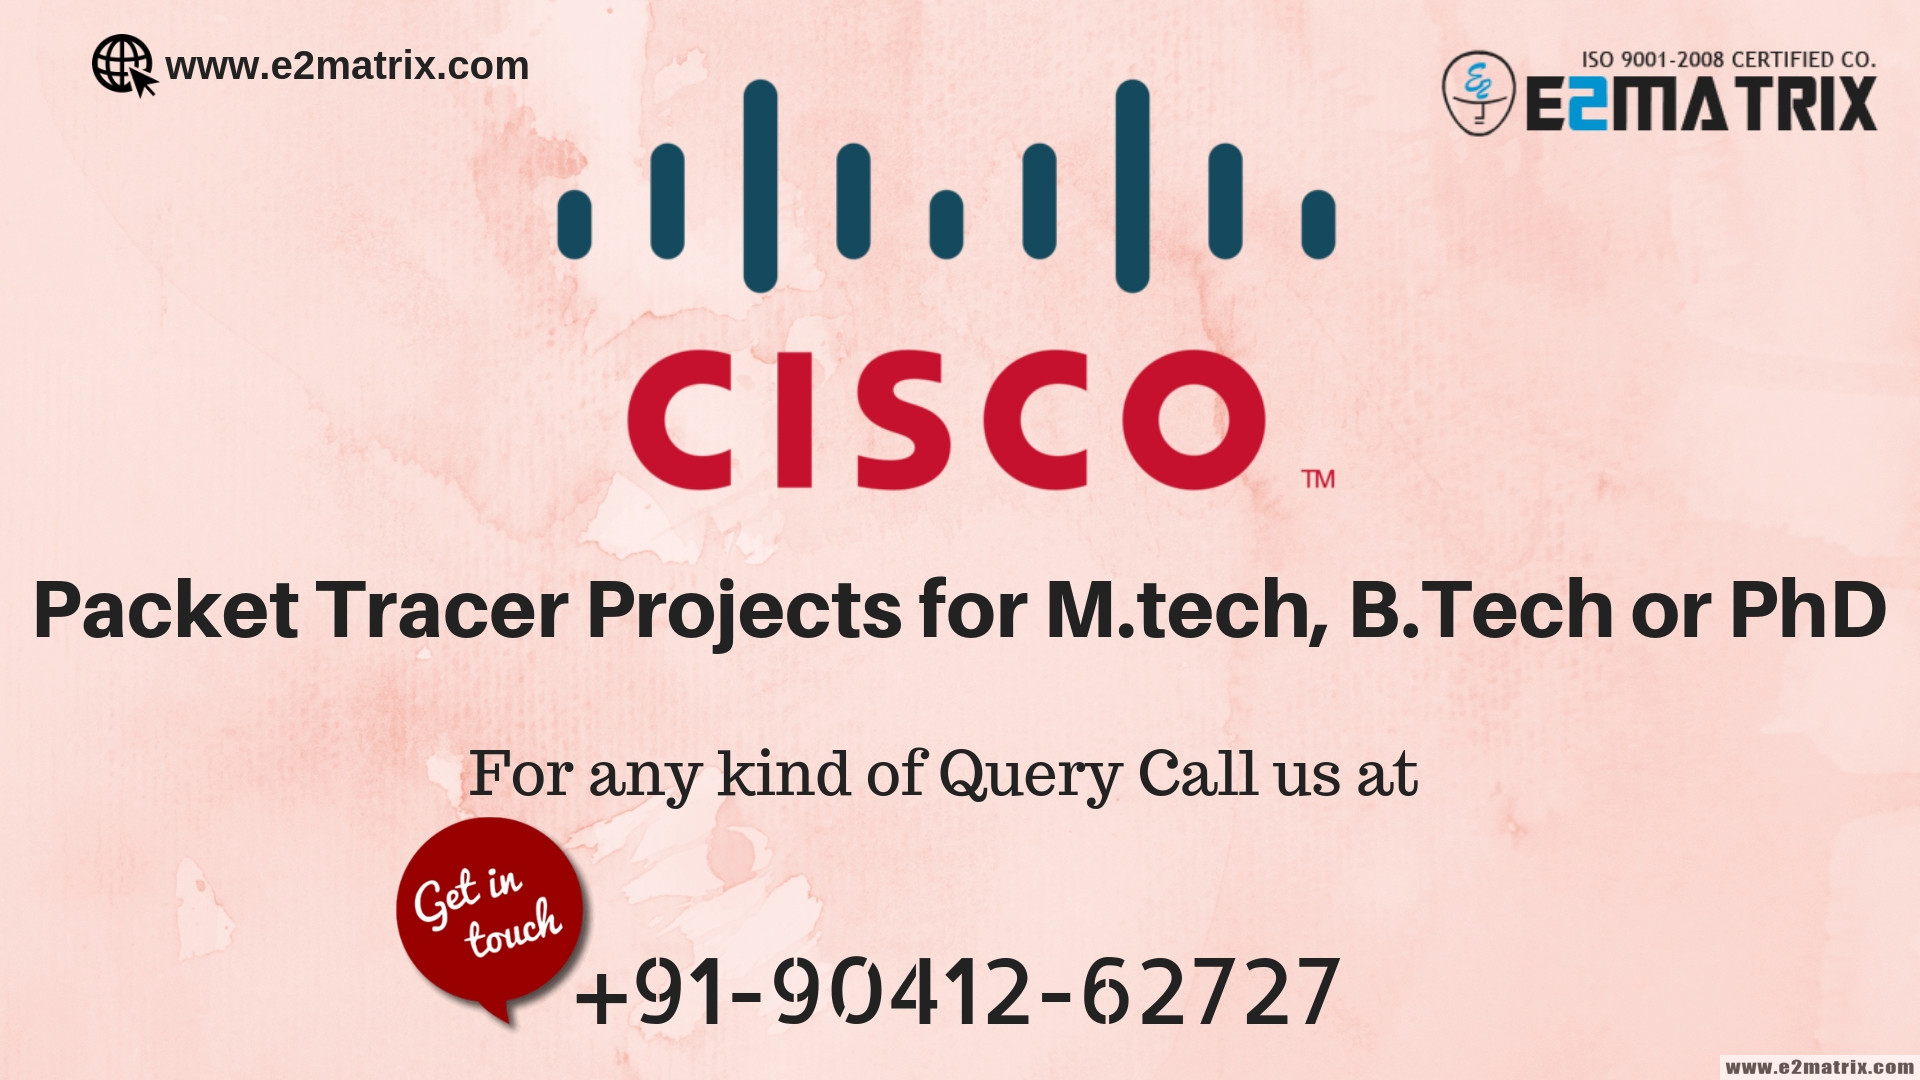 Cisco Packet Tracer Projects for M.tech, B.Tech or PhD